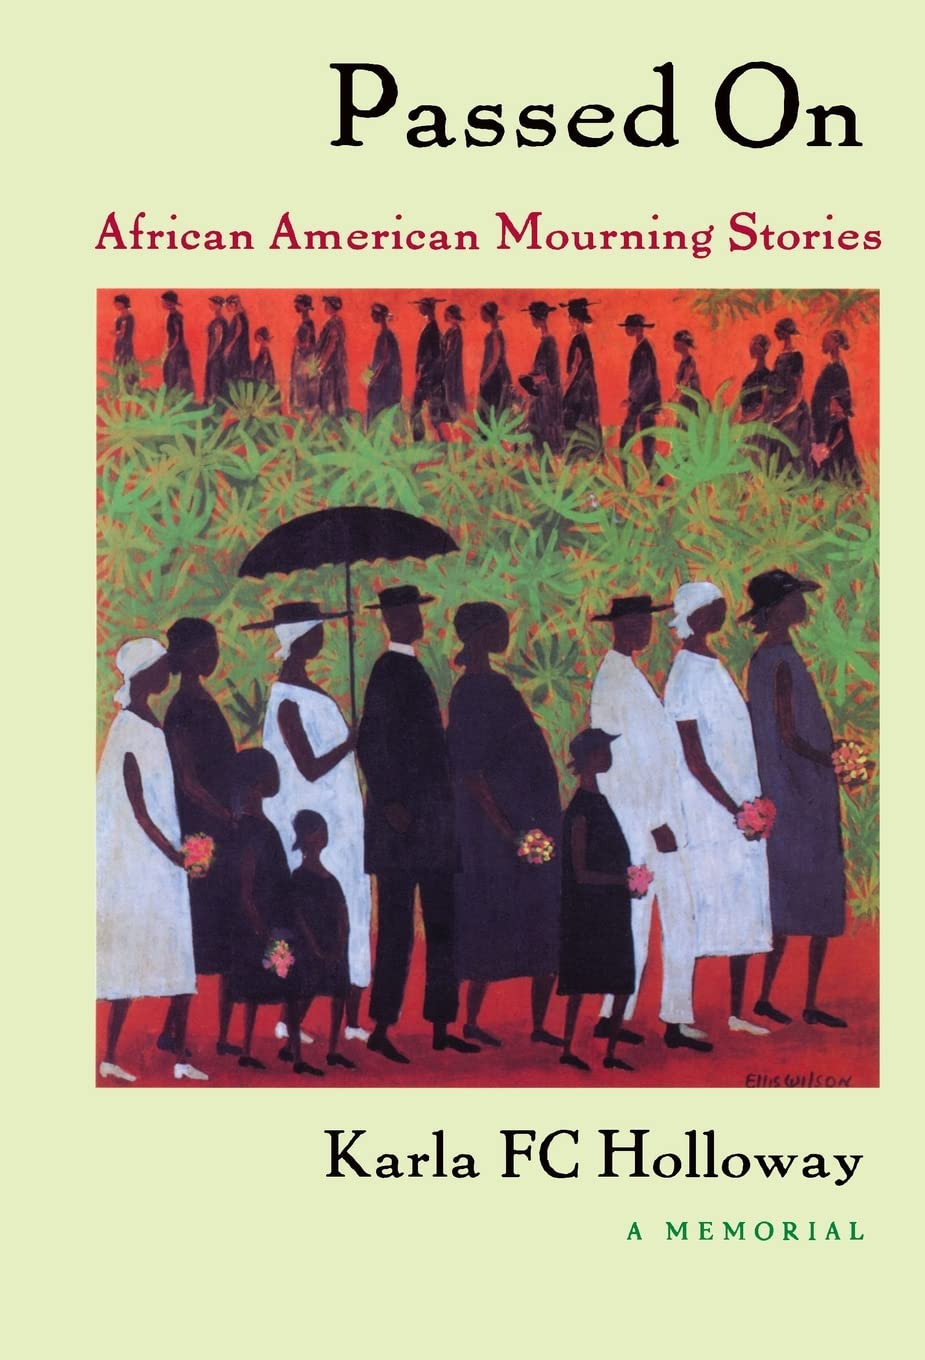 Passed on: African American Mourning Stories, a Memorial (John Hope Franklin Center Book)